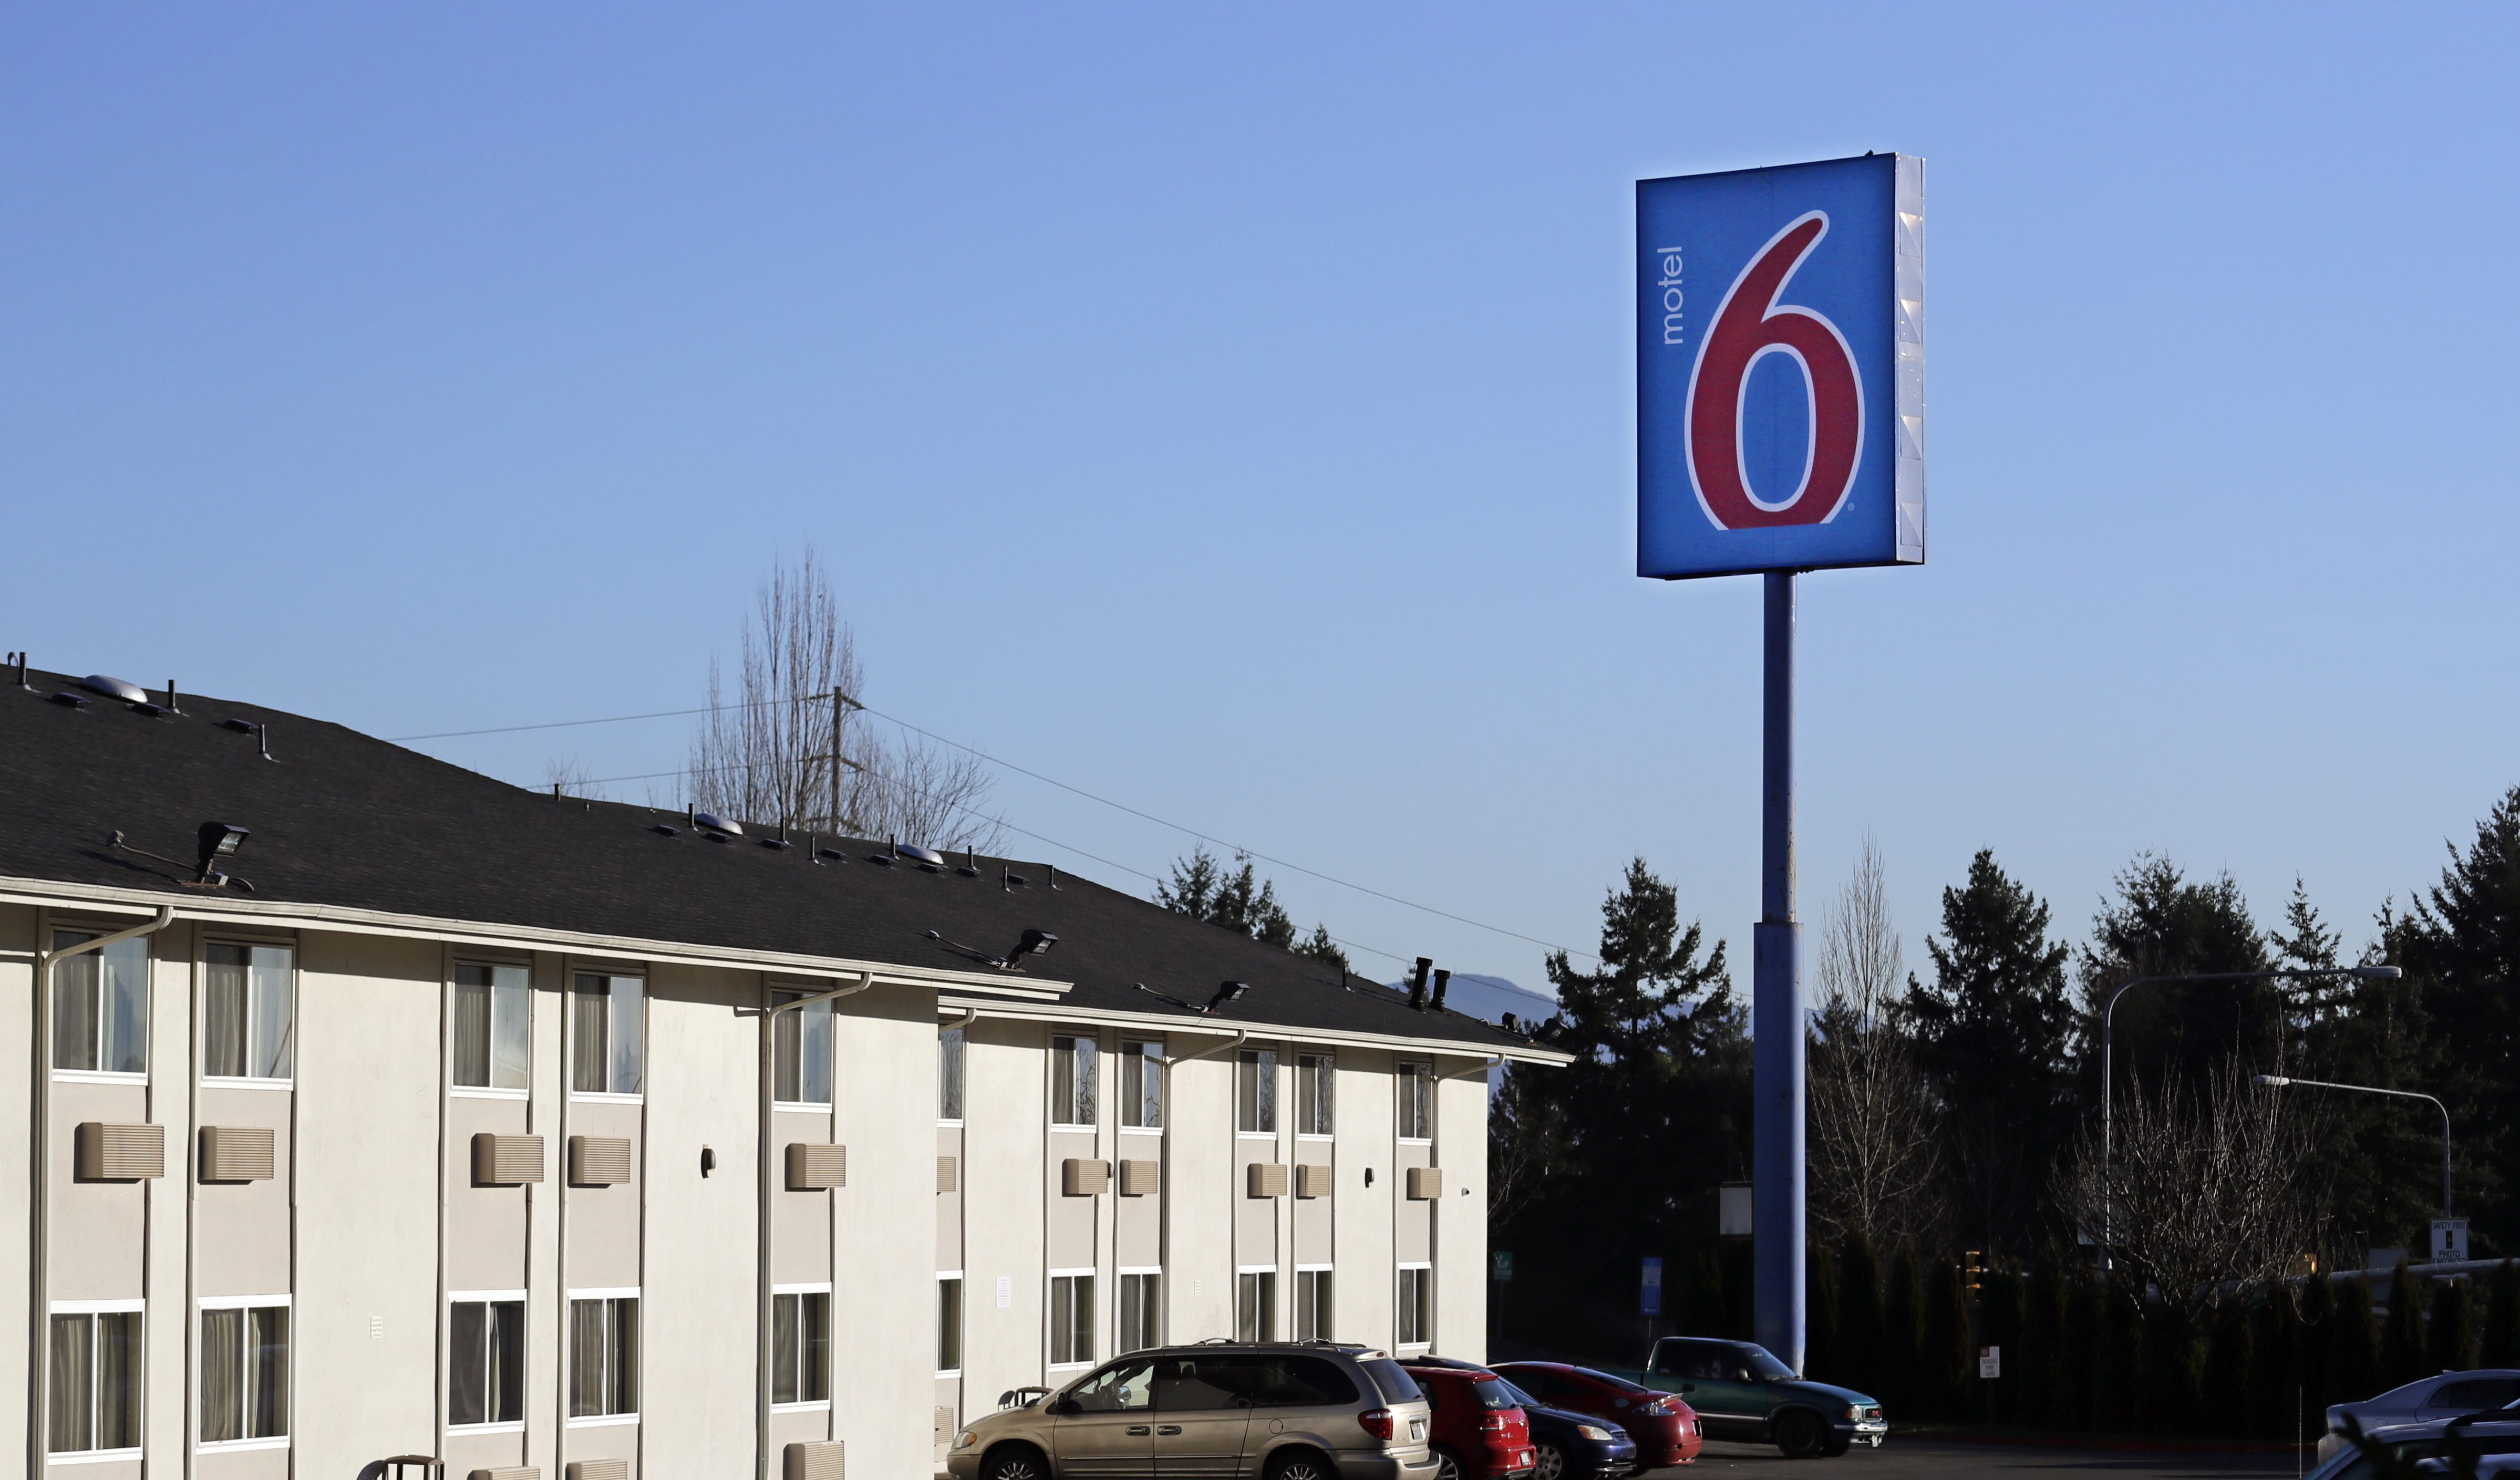 A Motel 6 motel is seen Wednesday, Jan. 3, 2018, in SeaTac, Wash. Washington's attorney general is suing Motel 6, saying the budget hotel disclosed the personal information of thousands of guests to federal immigration authorities in violation of state law. Attorney General Bob Ferguson said at a news conference Wednesday that the motel divulged to the U.S. Immigration and Customs Enforcement the names, dates of birth, license plate numbers and room numbers of more than 9,000 guests at six locations throughout the state.